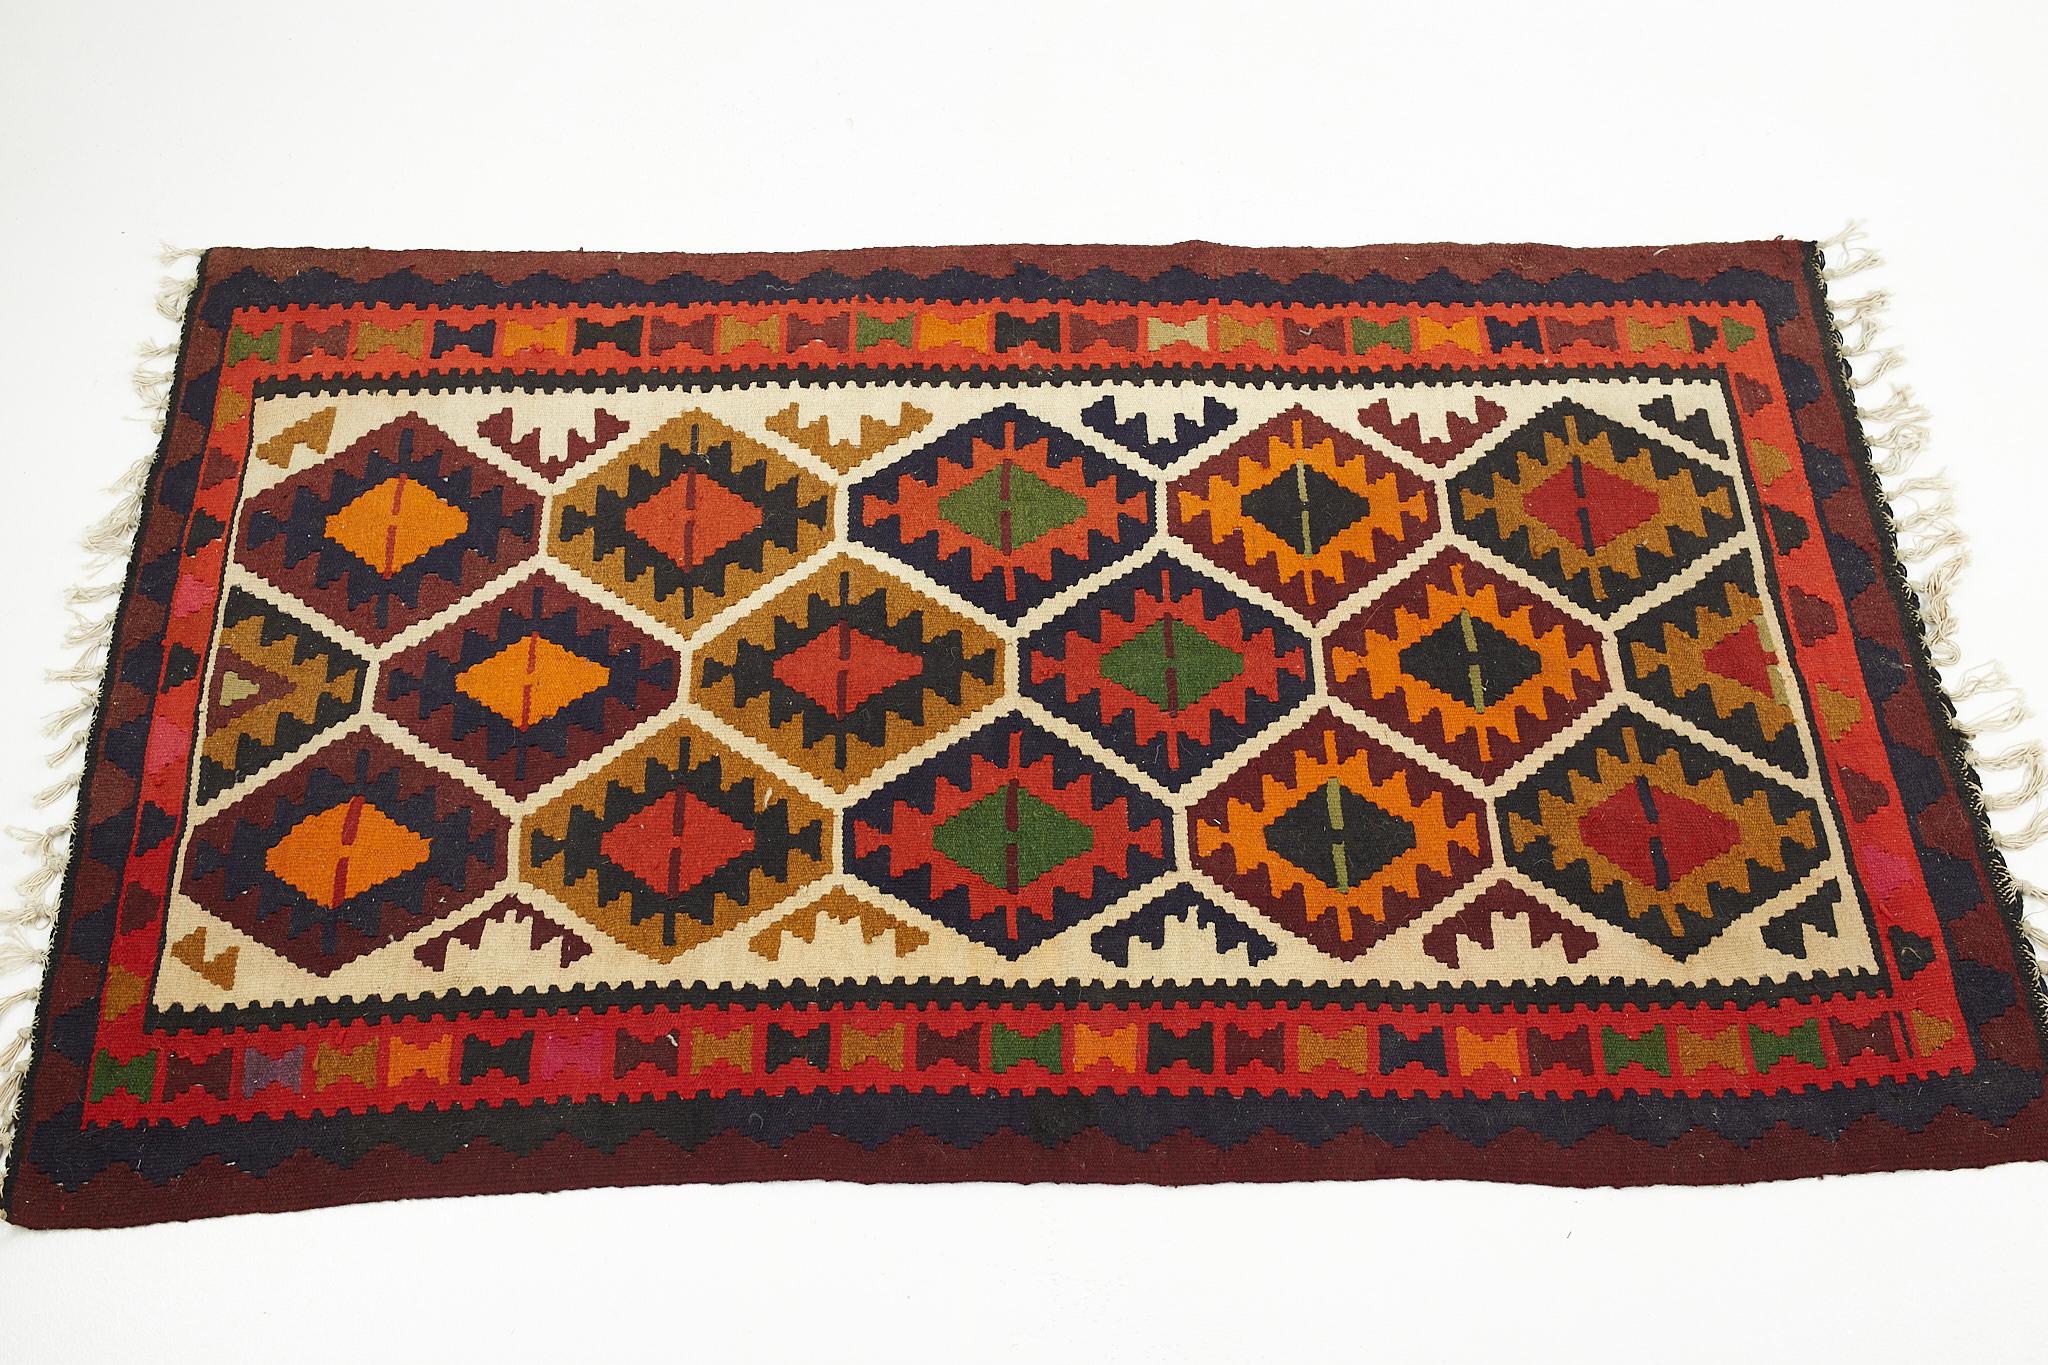 Mid century multicolored southwest motif flatweave wool rug

The rug measures: 67 wide x 38.5 inches deep 

We take our photos in a controlled lighting studio to show as much detail as possible. We do not photoshop out blemishes. 

We keep you